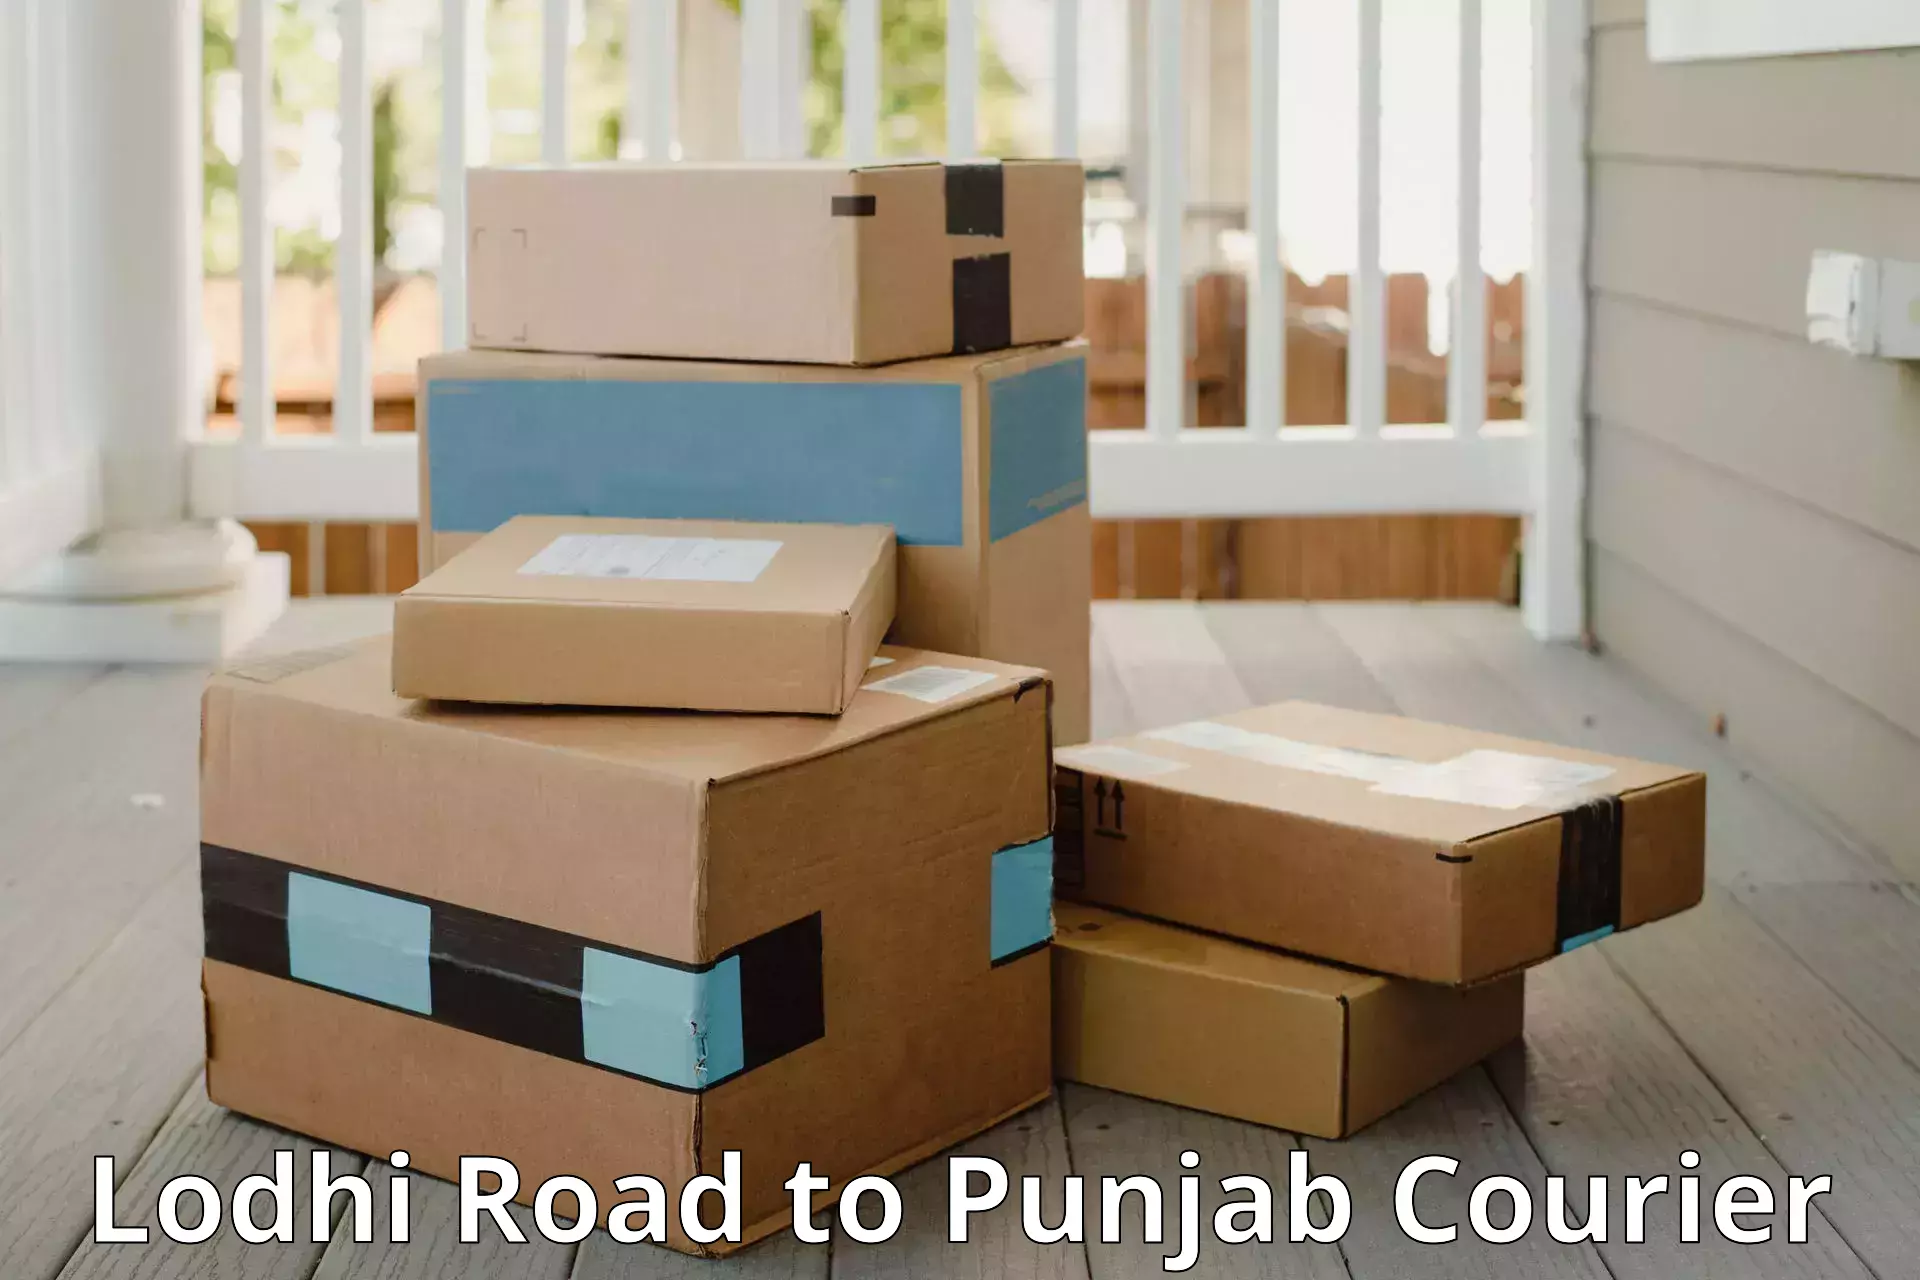 Luggage delivery app Lodhi Road to Rampura Phul